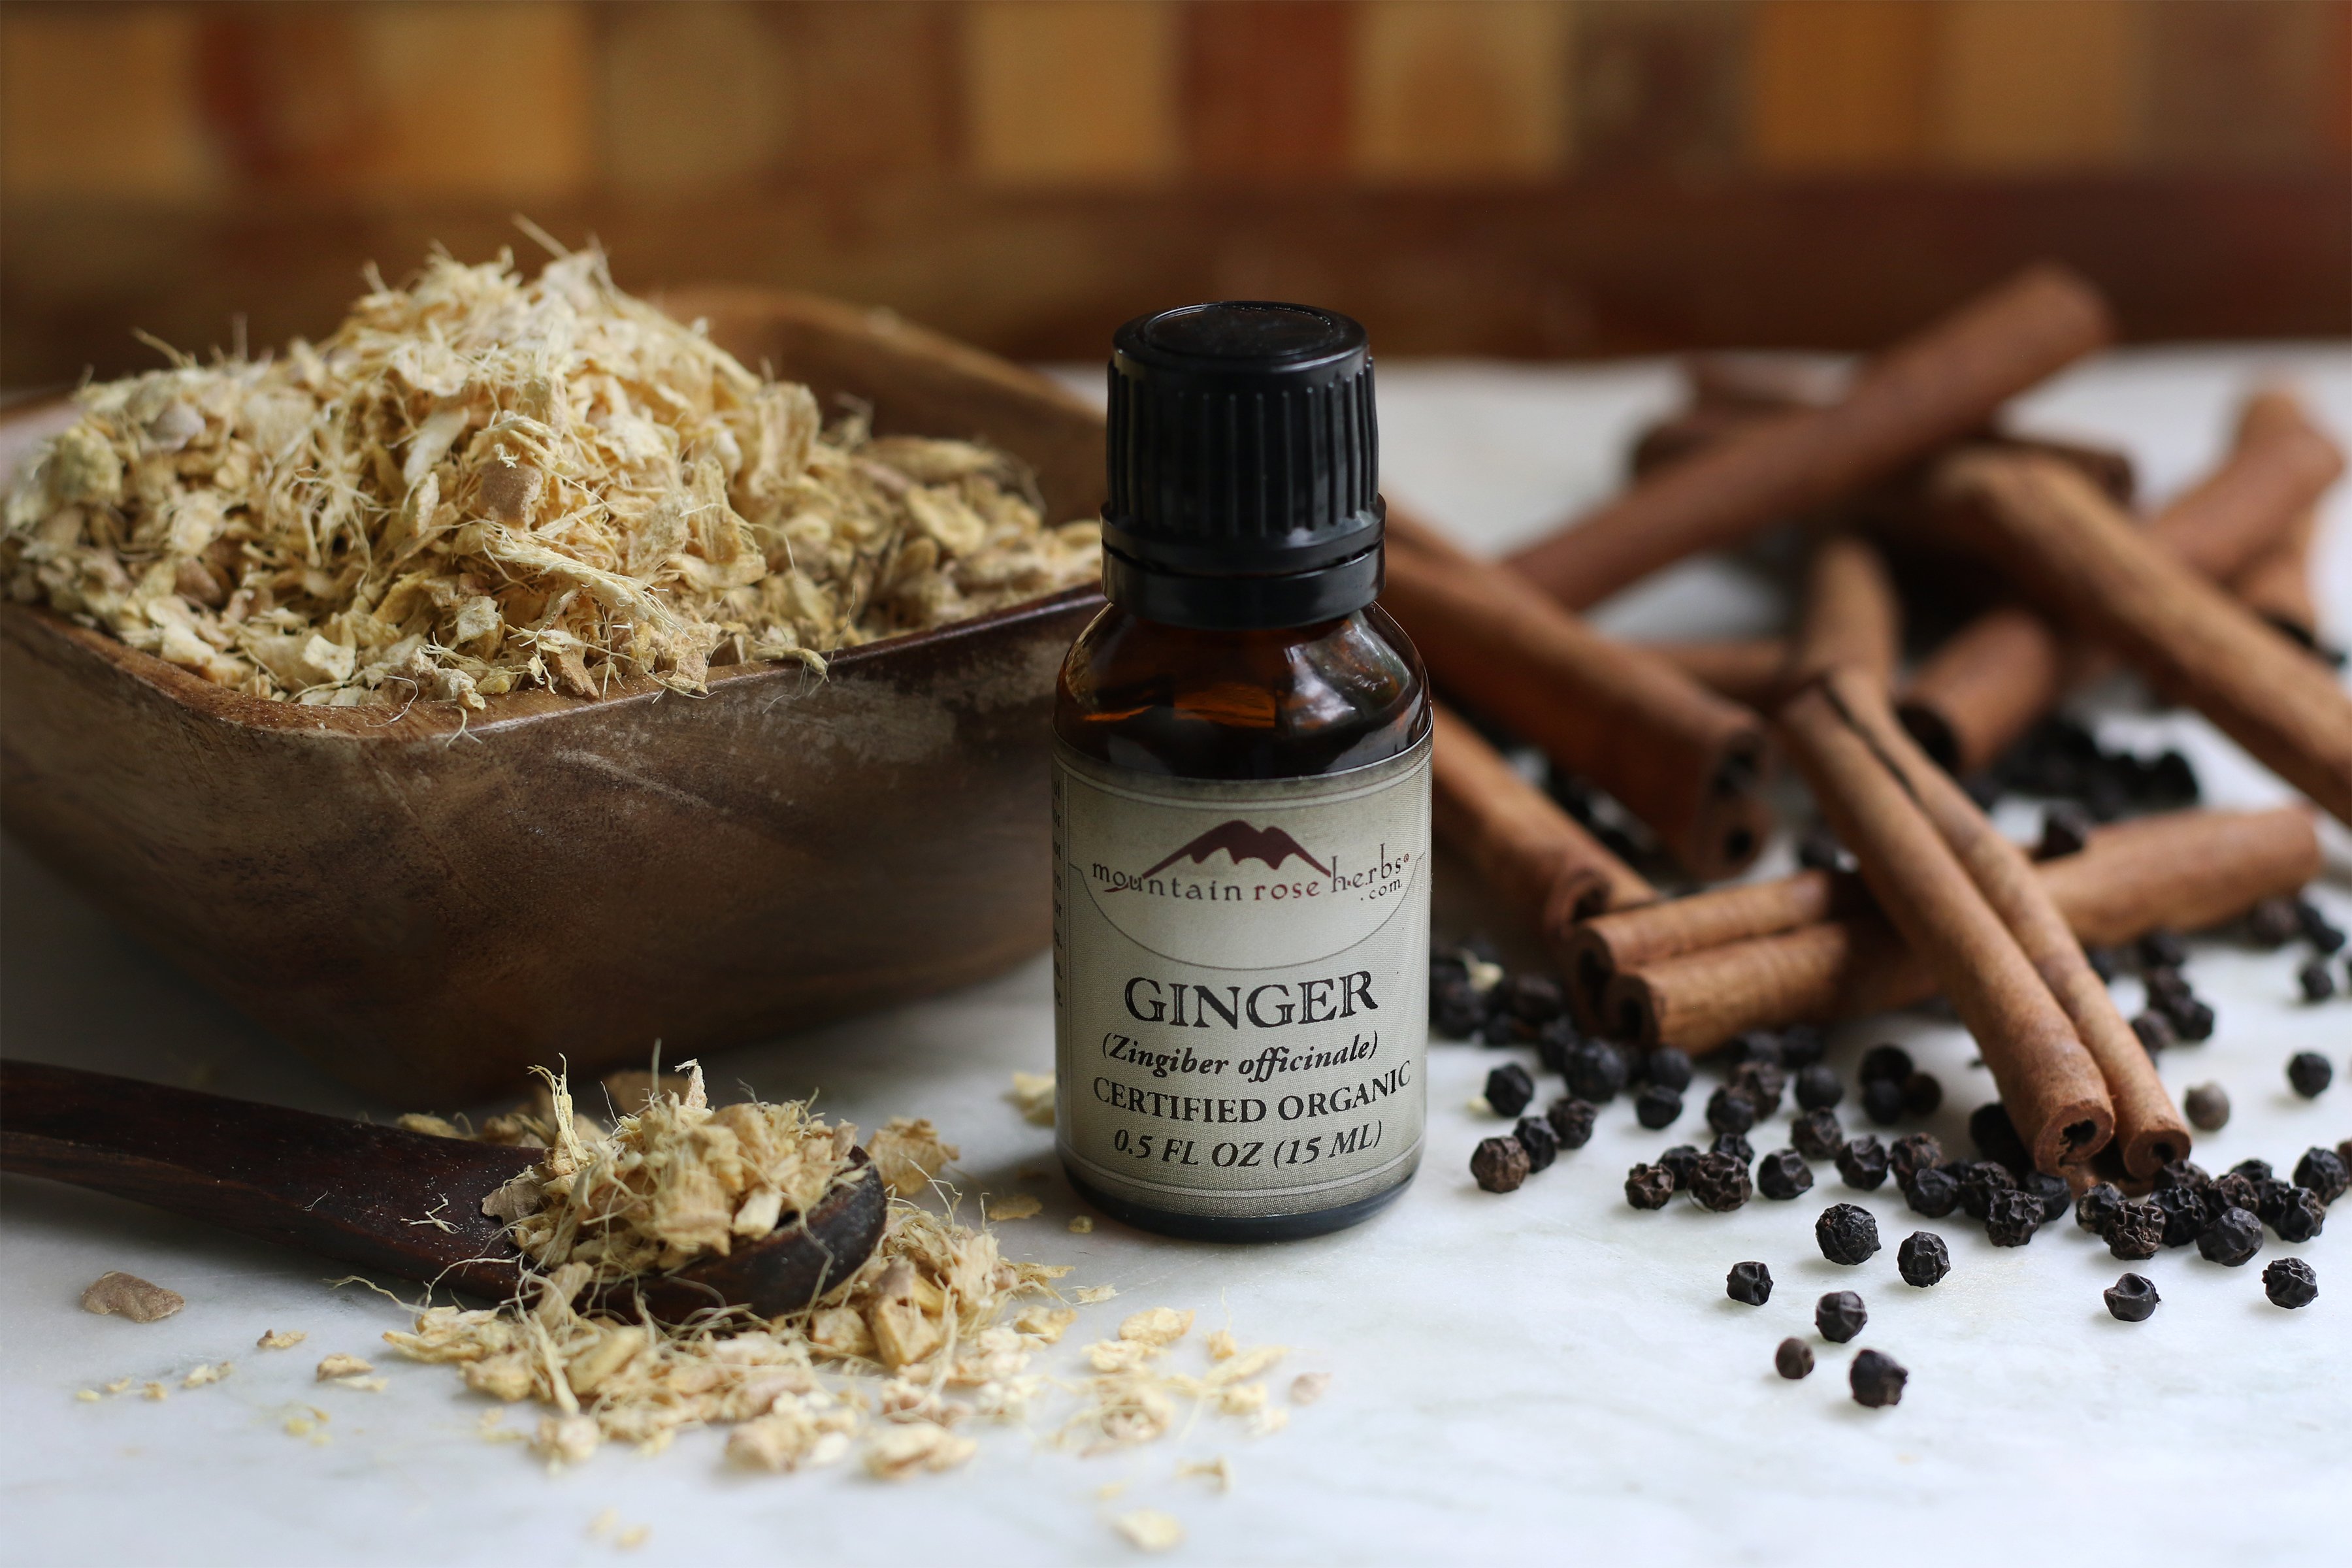 Organic and fair trade ginger essential oil arranged with dried and cut ginger root, organic cinnamon sticks and peppercorns. 